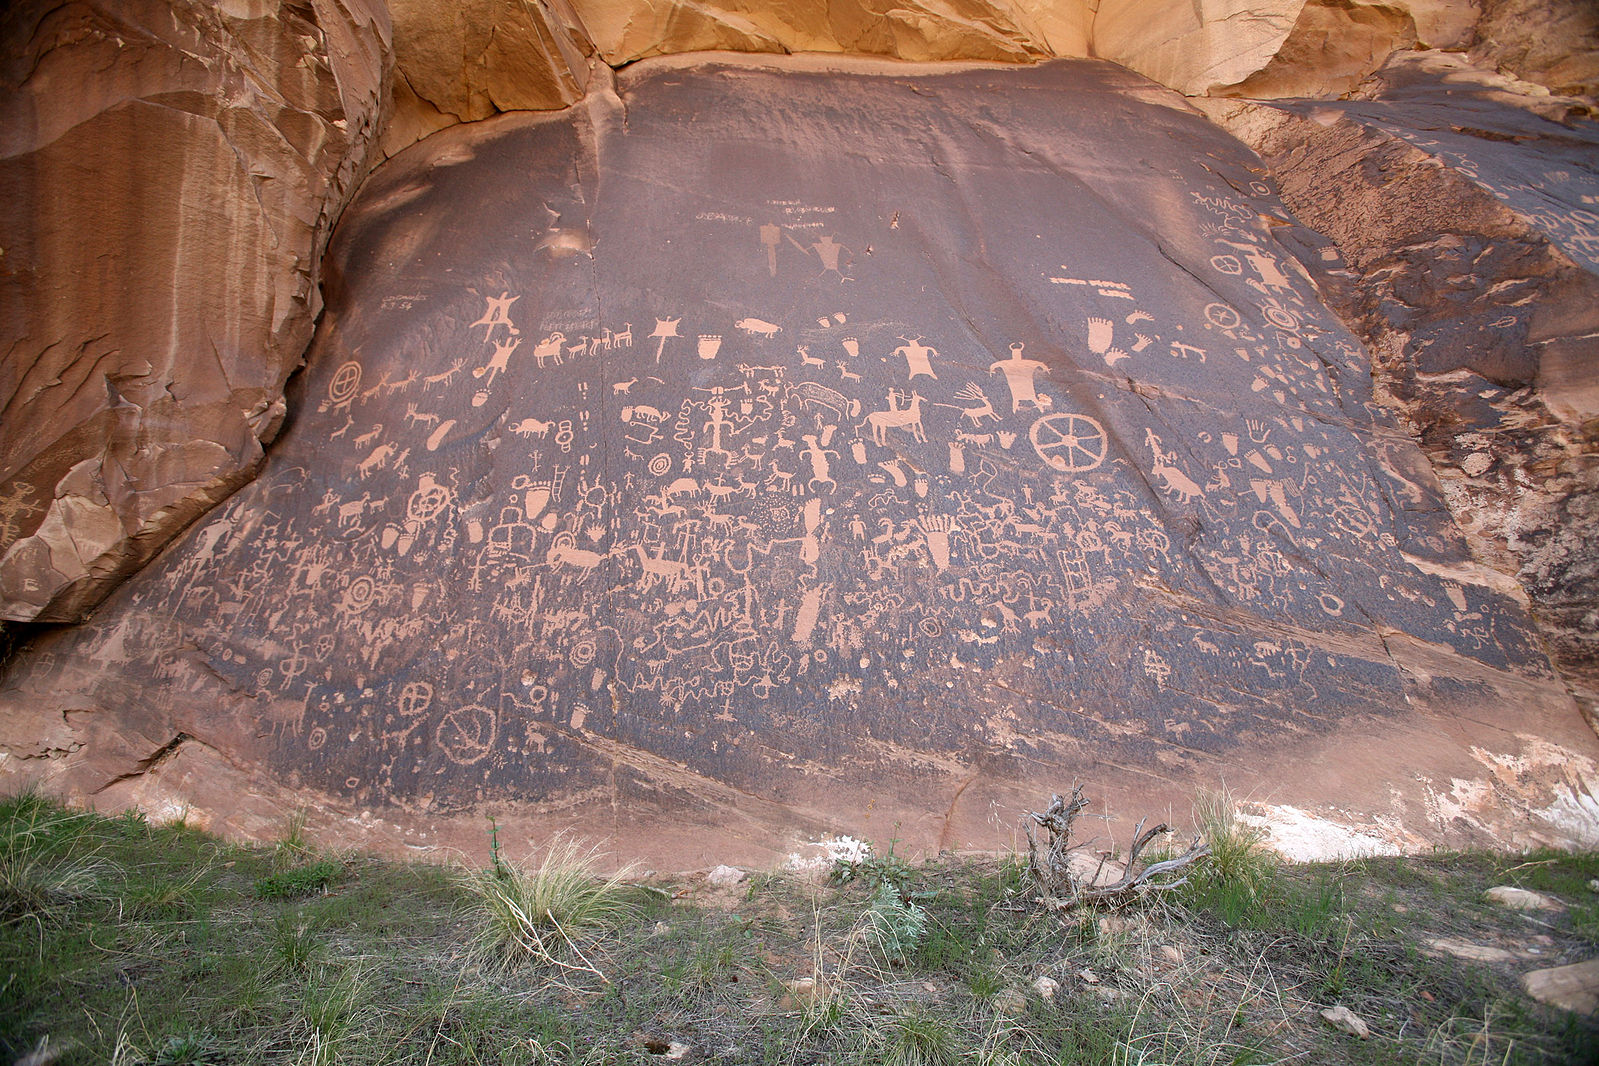 The rock is dark brown with petroglyphs